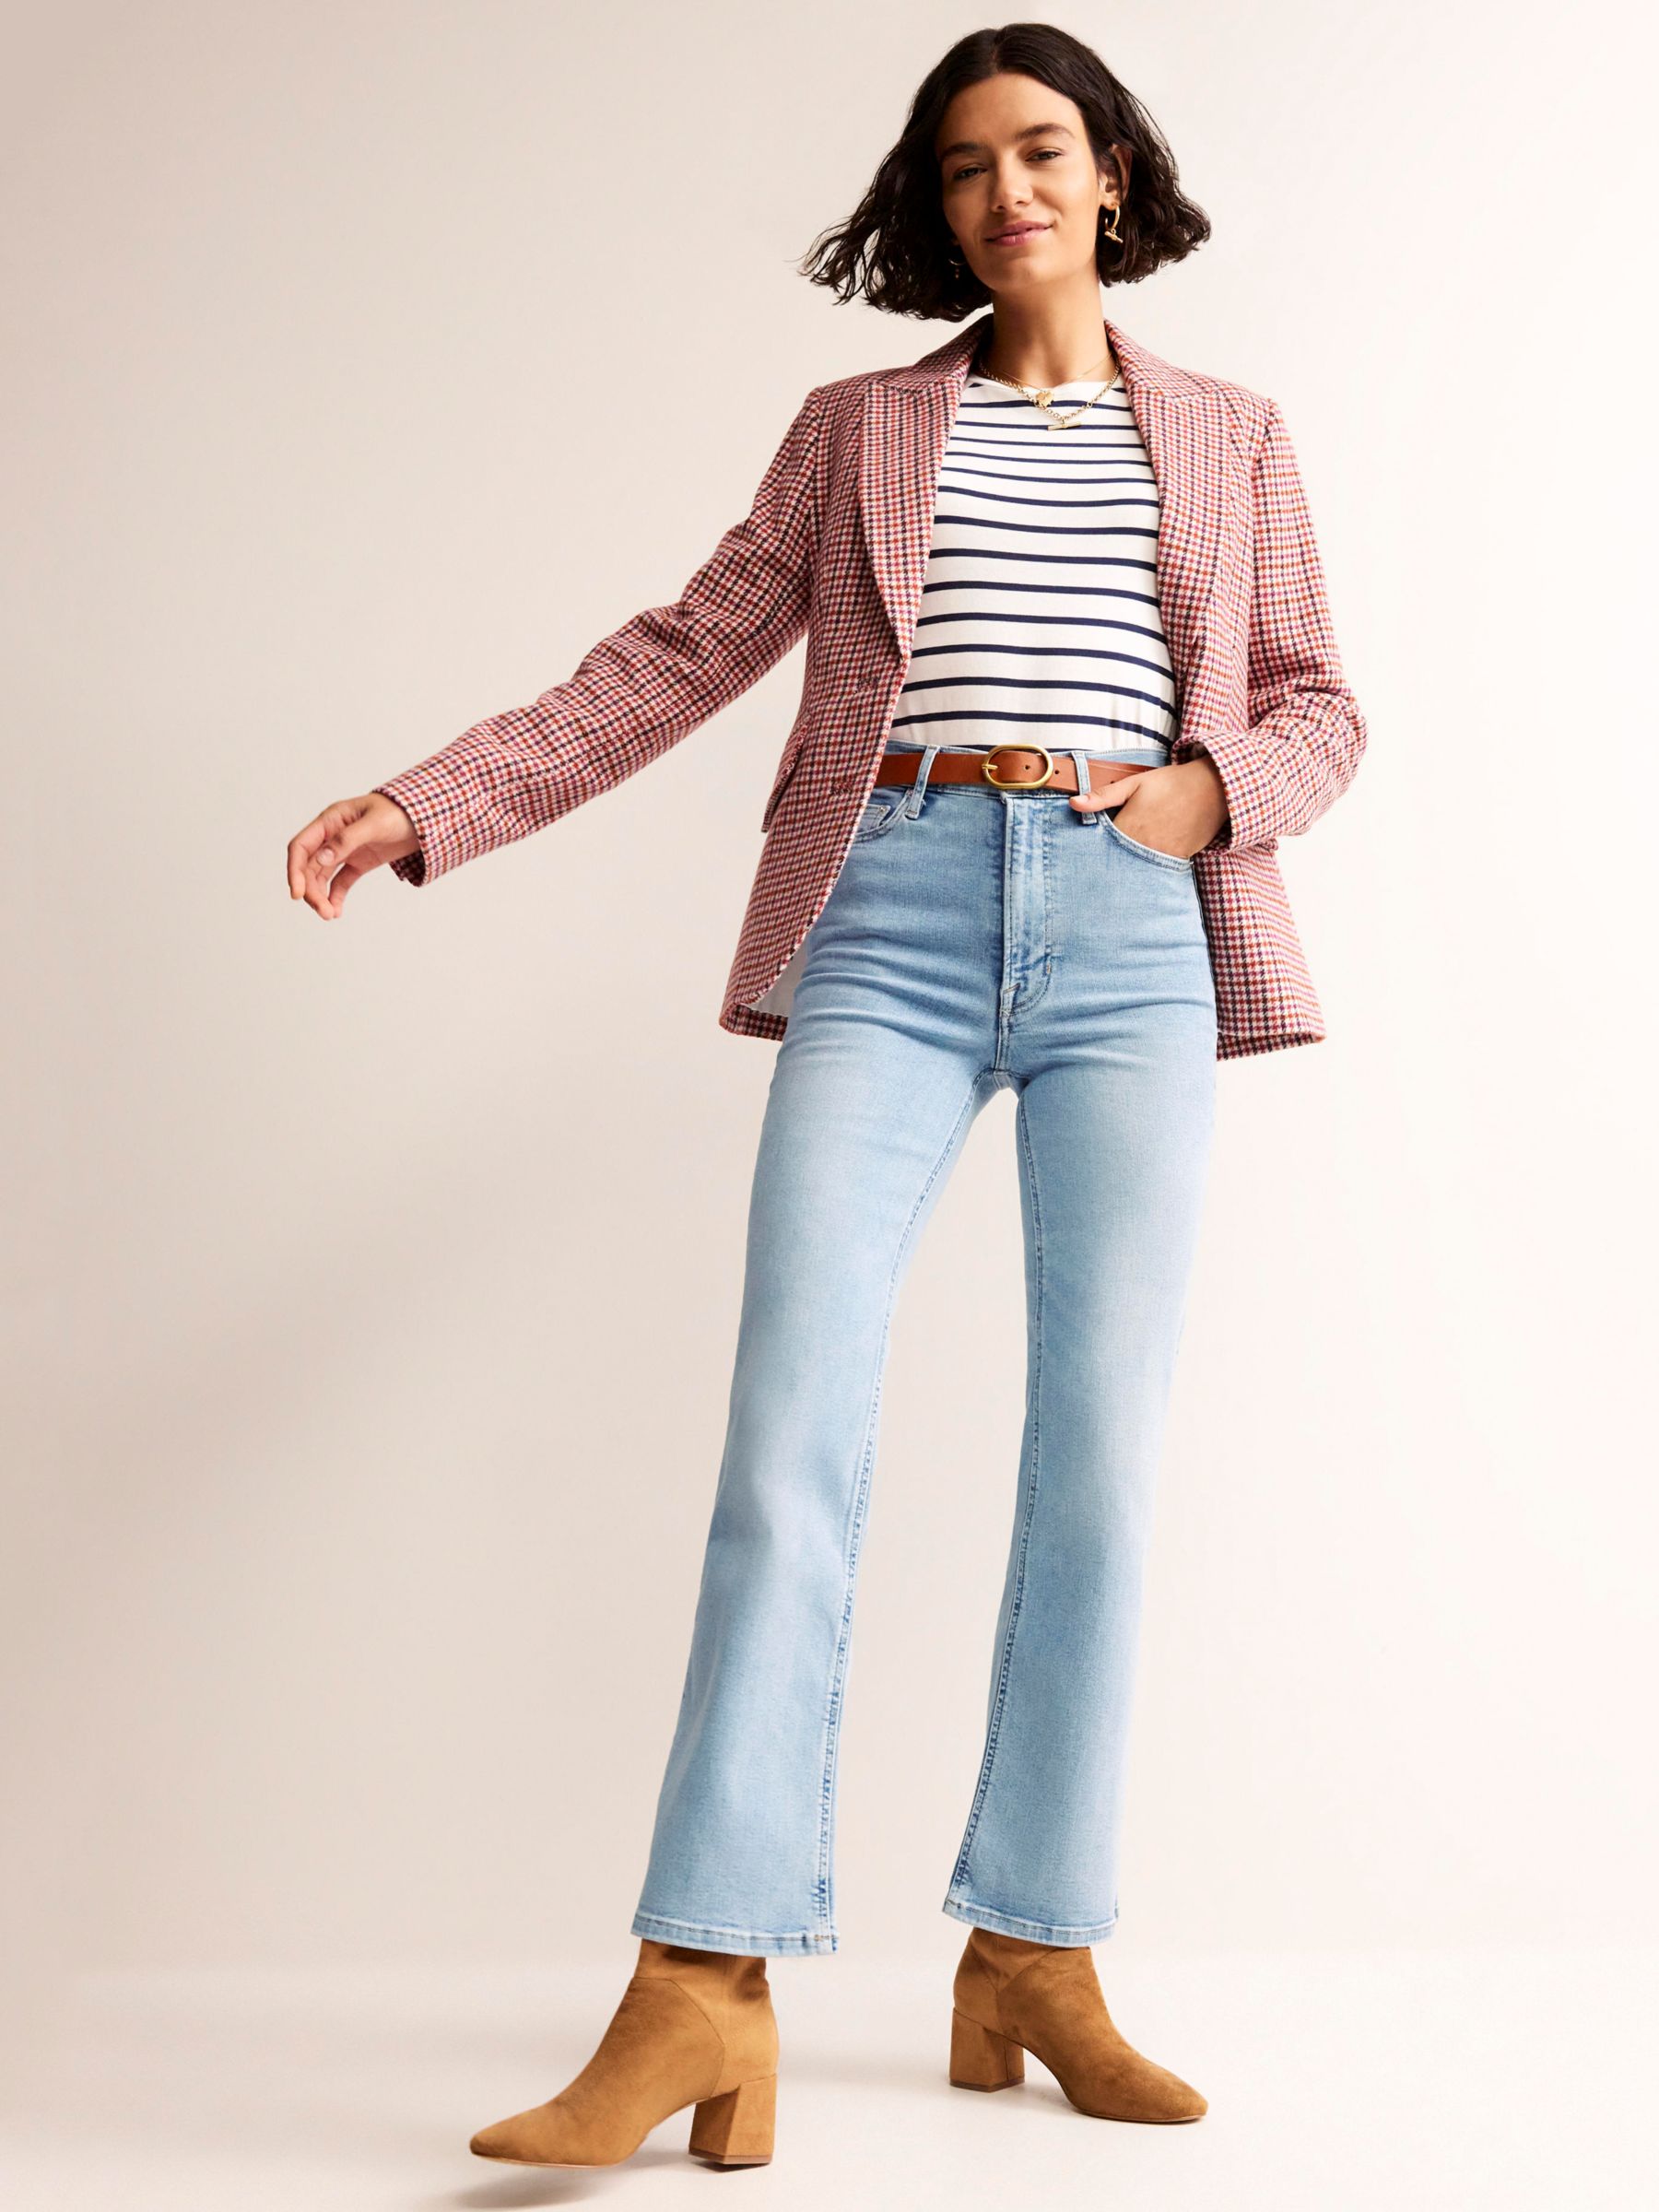 Light Colored Jeans Outfit | John Lewis & Partners